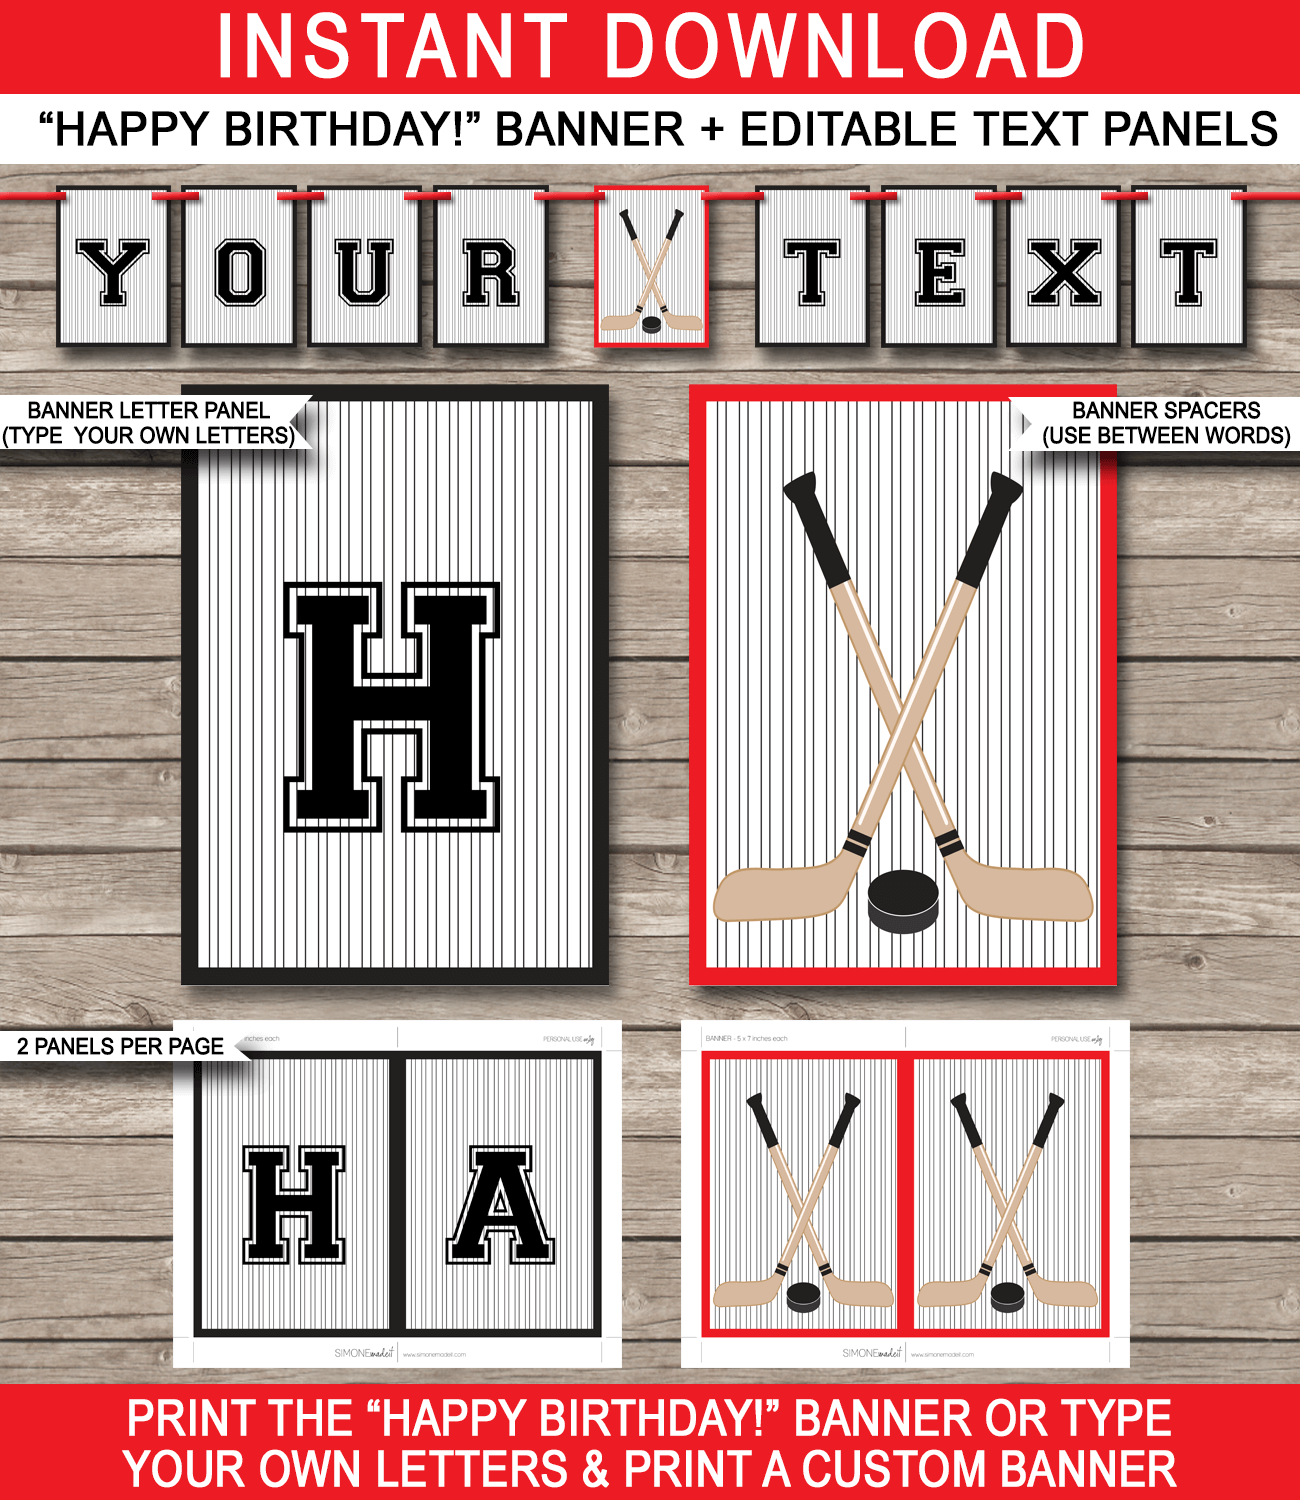 Hockey Party Banner Template - Hockey Bunting - Happy Birthday Banner - Birthday Party - Red and Black - Editable and Printable DIY Template - INSTANT DOWNLOAD $4.50 via simonemadeit.com